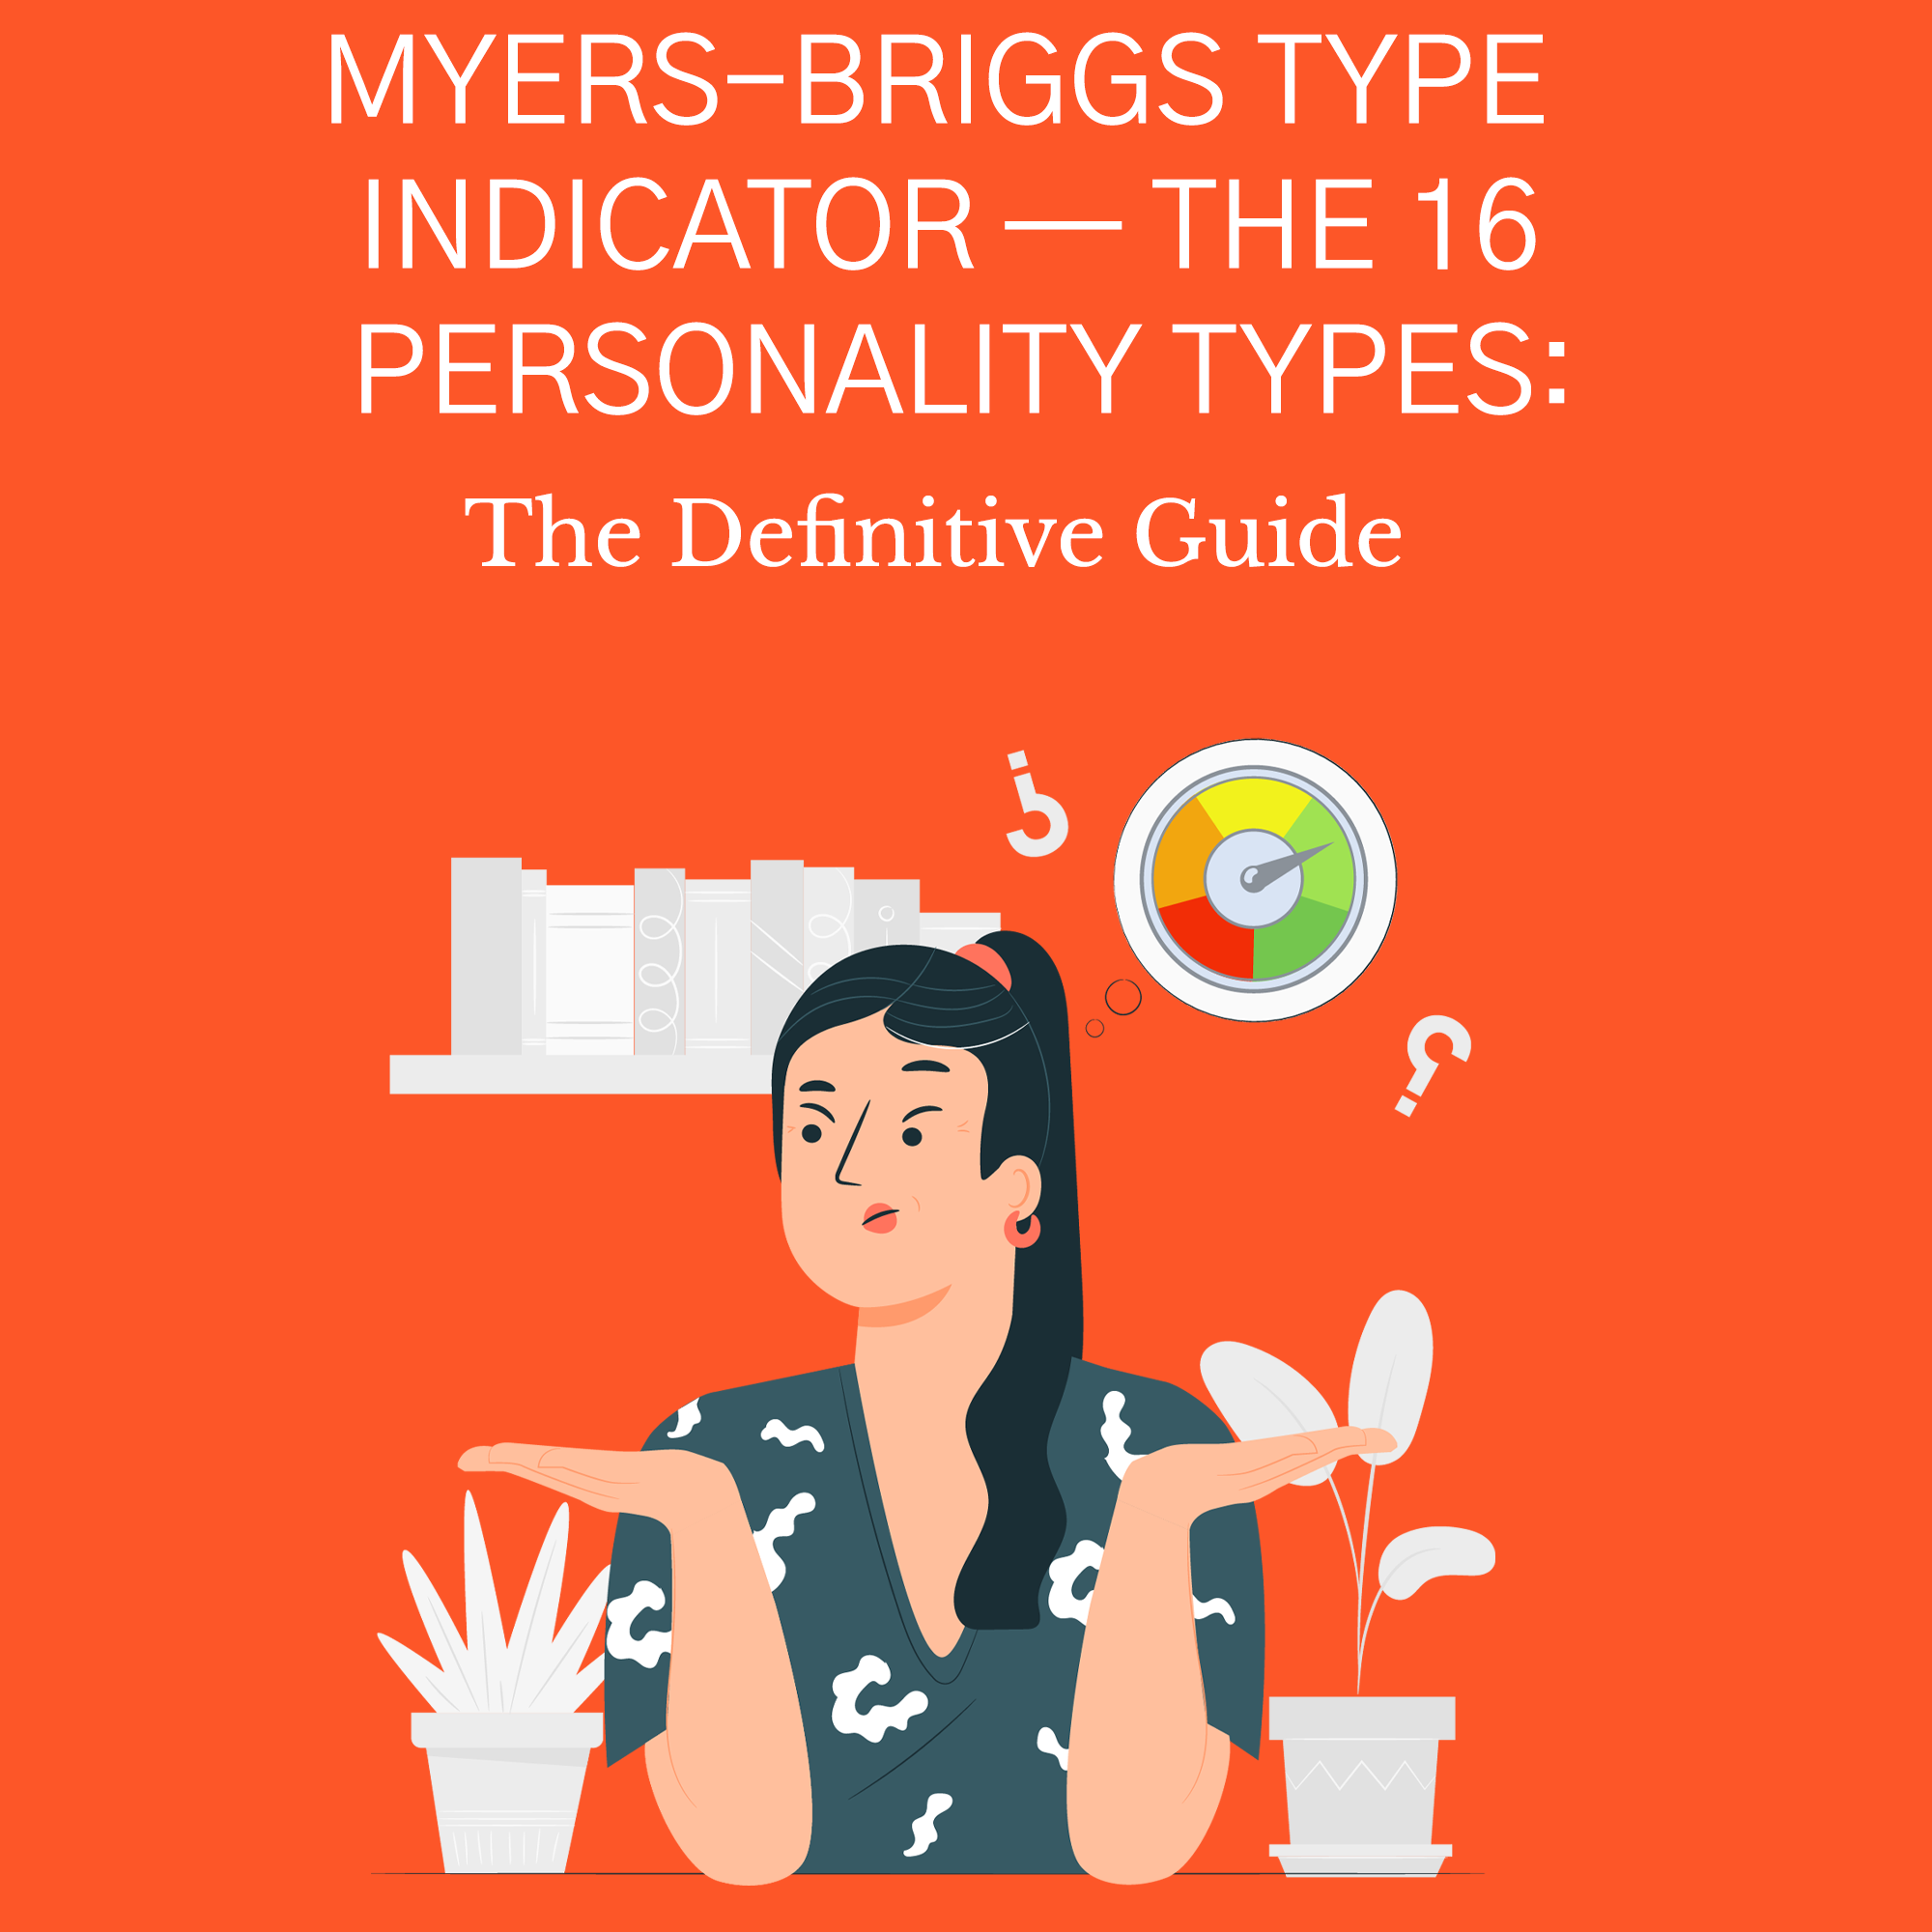 Myers-Briggs Type Indicator — The 16 Personality Types: The Definitive Guide myers-briggs type indicator